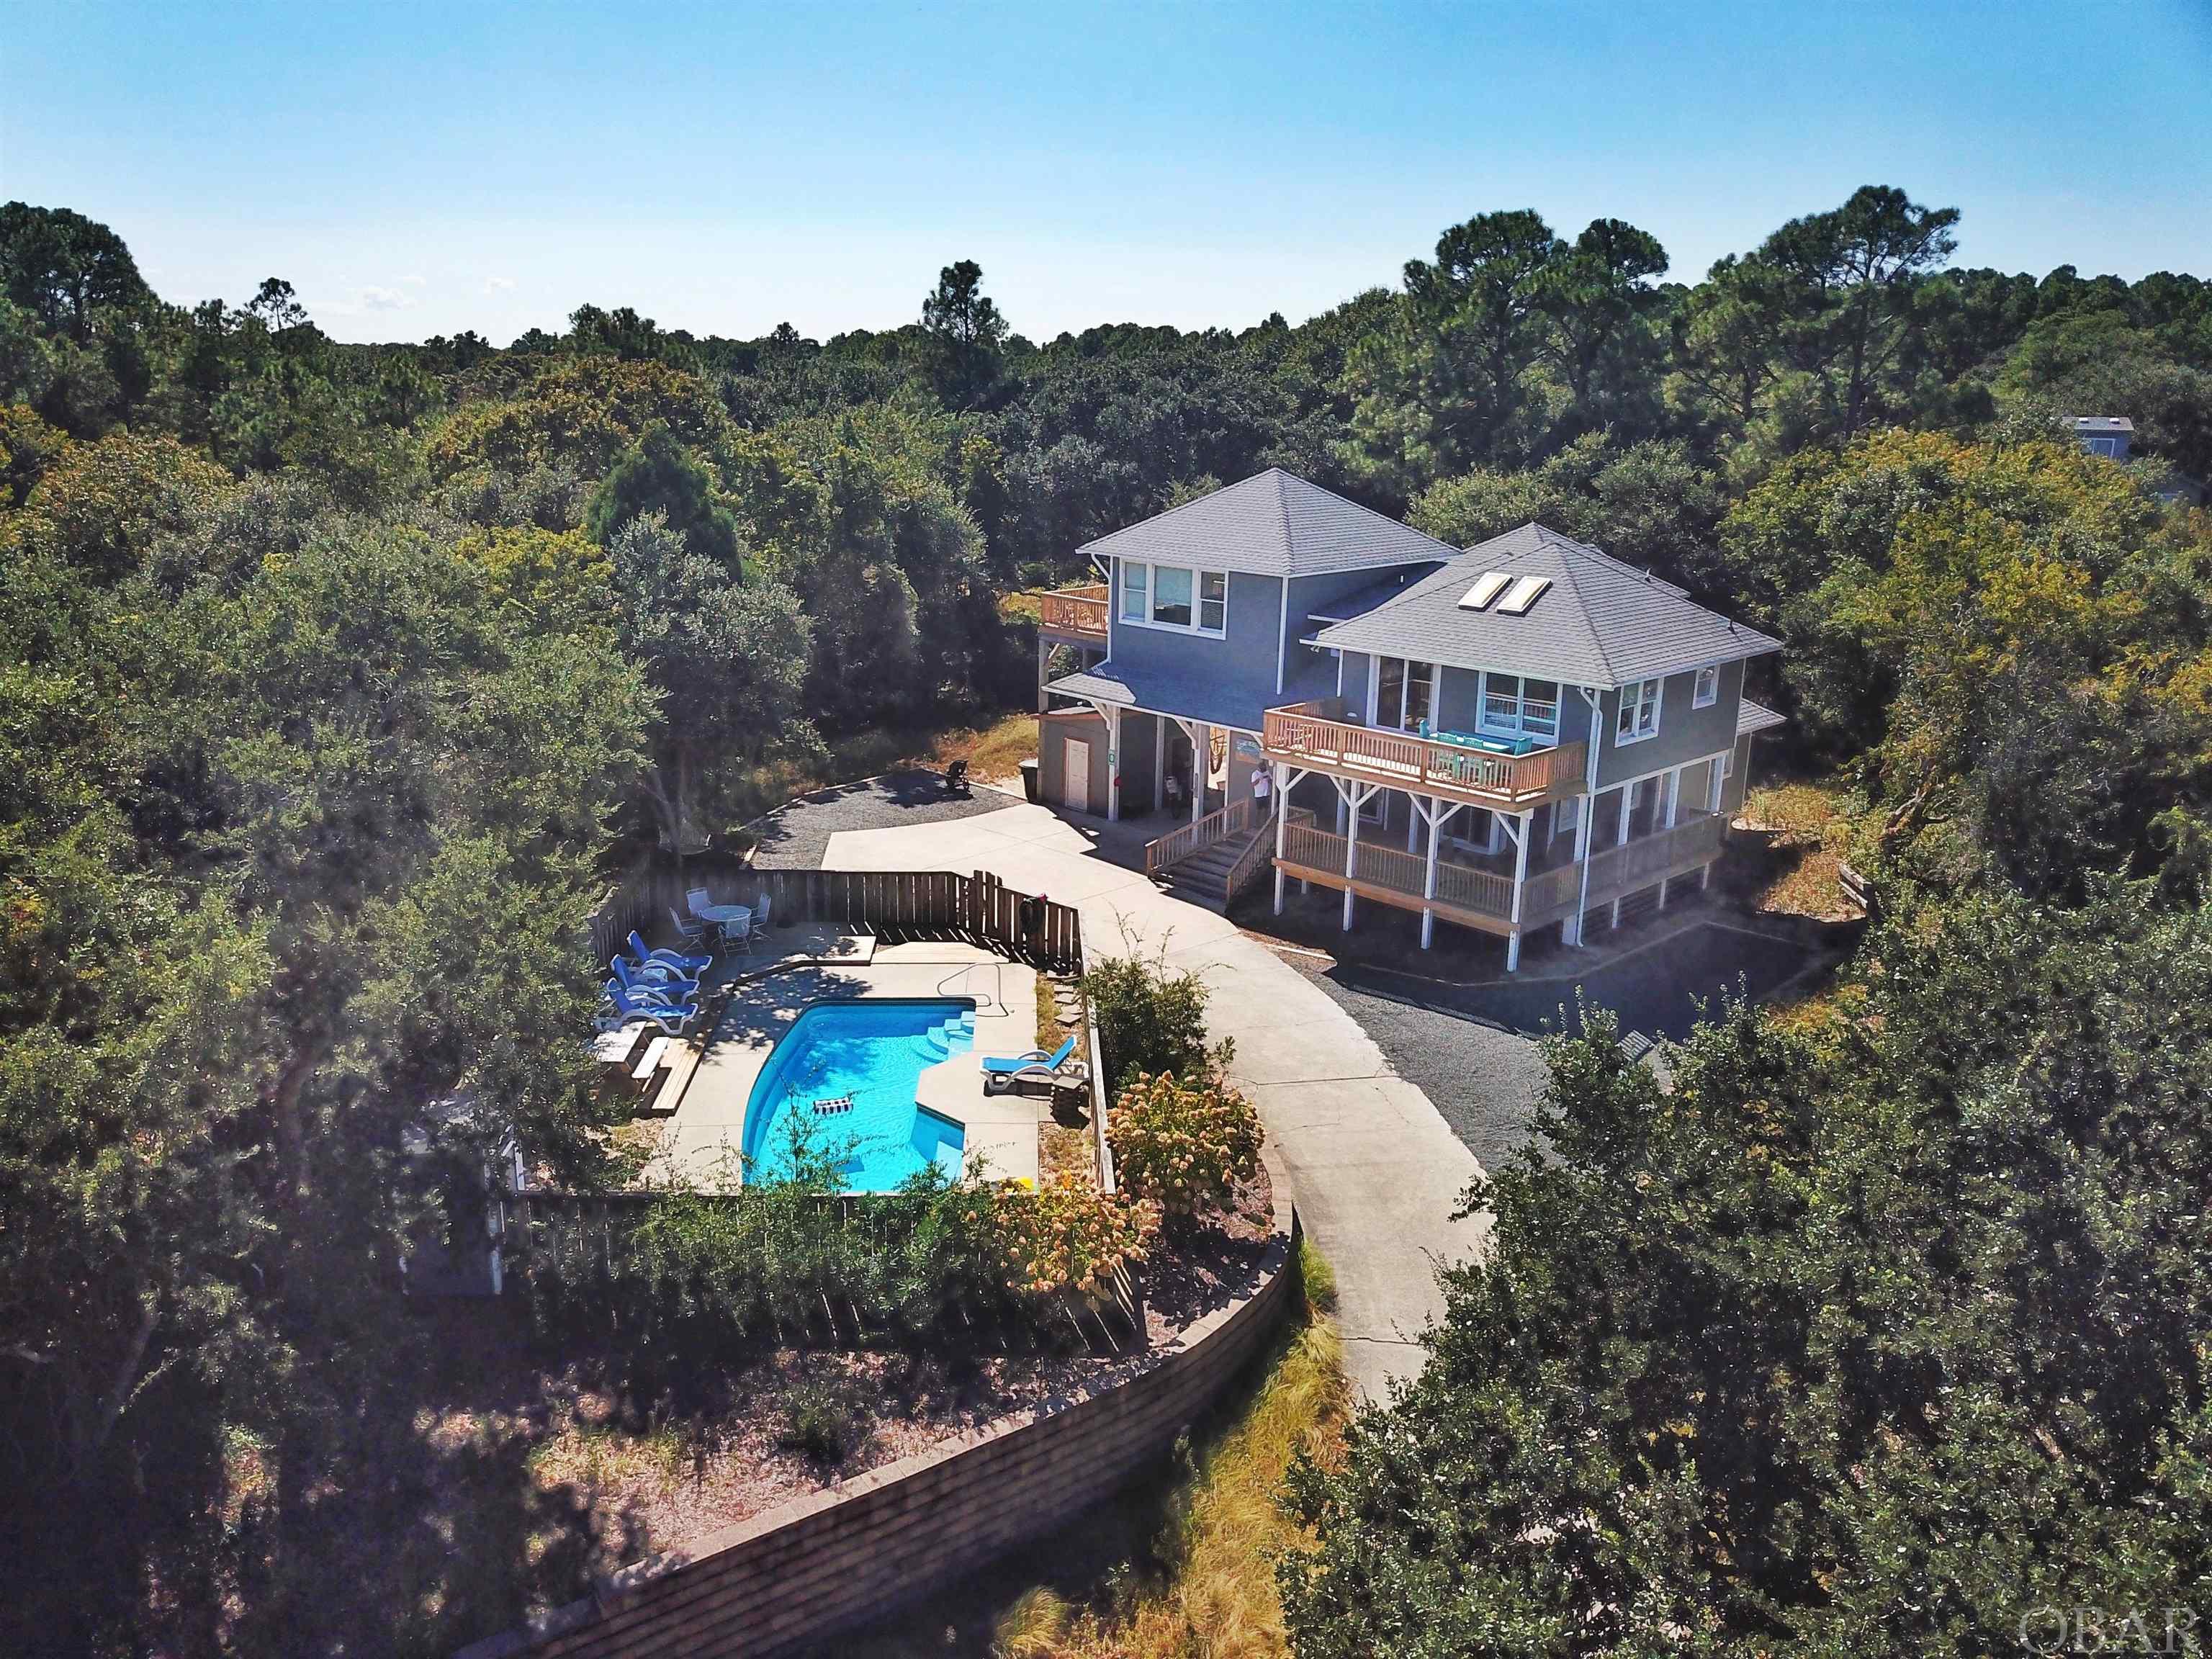 **OFFER DEADLINE: August 22, 2022 at 12 pm - Highest and Best ** Don't miss out on this Southern Shores gem.  Walking distance to Hillcrest Beach access with a stoplight and crosswalk.  This home features a private pool on an expansive mostly cleared lot but tucked away from the street with beautiful live oaks surrounding the property.  5 bedrooms and 3 bathrooms on the first level, with the second level having a primary suite and en suite bathroom, a half bath, a spacious kitchen and dining room, from the dining room you walk past your bar area into the elevated living room with slight ocean views over the trees.  There is plenty of deck space and outdoor space for the whole family to enjoy!  There are two storage sheds outside for all your owners and beach storage needs.  The private pool is situated high on a bluff with potential to add a pool house or garage out front (buyer agent to verify with town of SS)   This home is currently used as an Airbnb in the summer months and some shoulder season dates. 2022 has over 91k in booked rents with numerous weeks blocked in fall for owner. Prior to sellers purchase, this was a gently used second home.  Last fall , seller used home for most of September and did close to 10k in rentals in October / November. Don't miss this opportunity to own this great rental house, primary residence, or second home!  Schedule your showing TODAY!